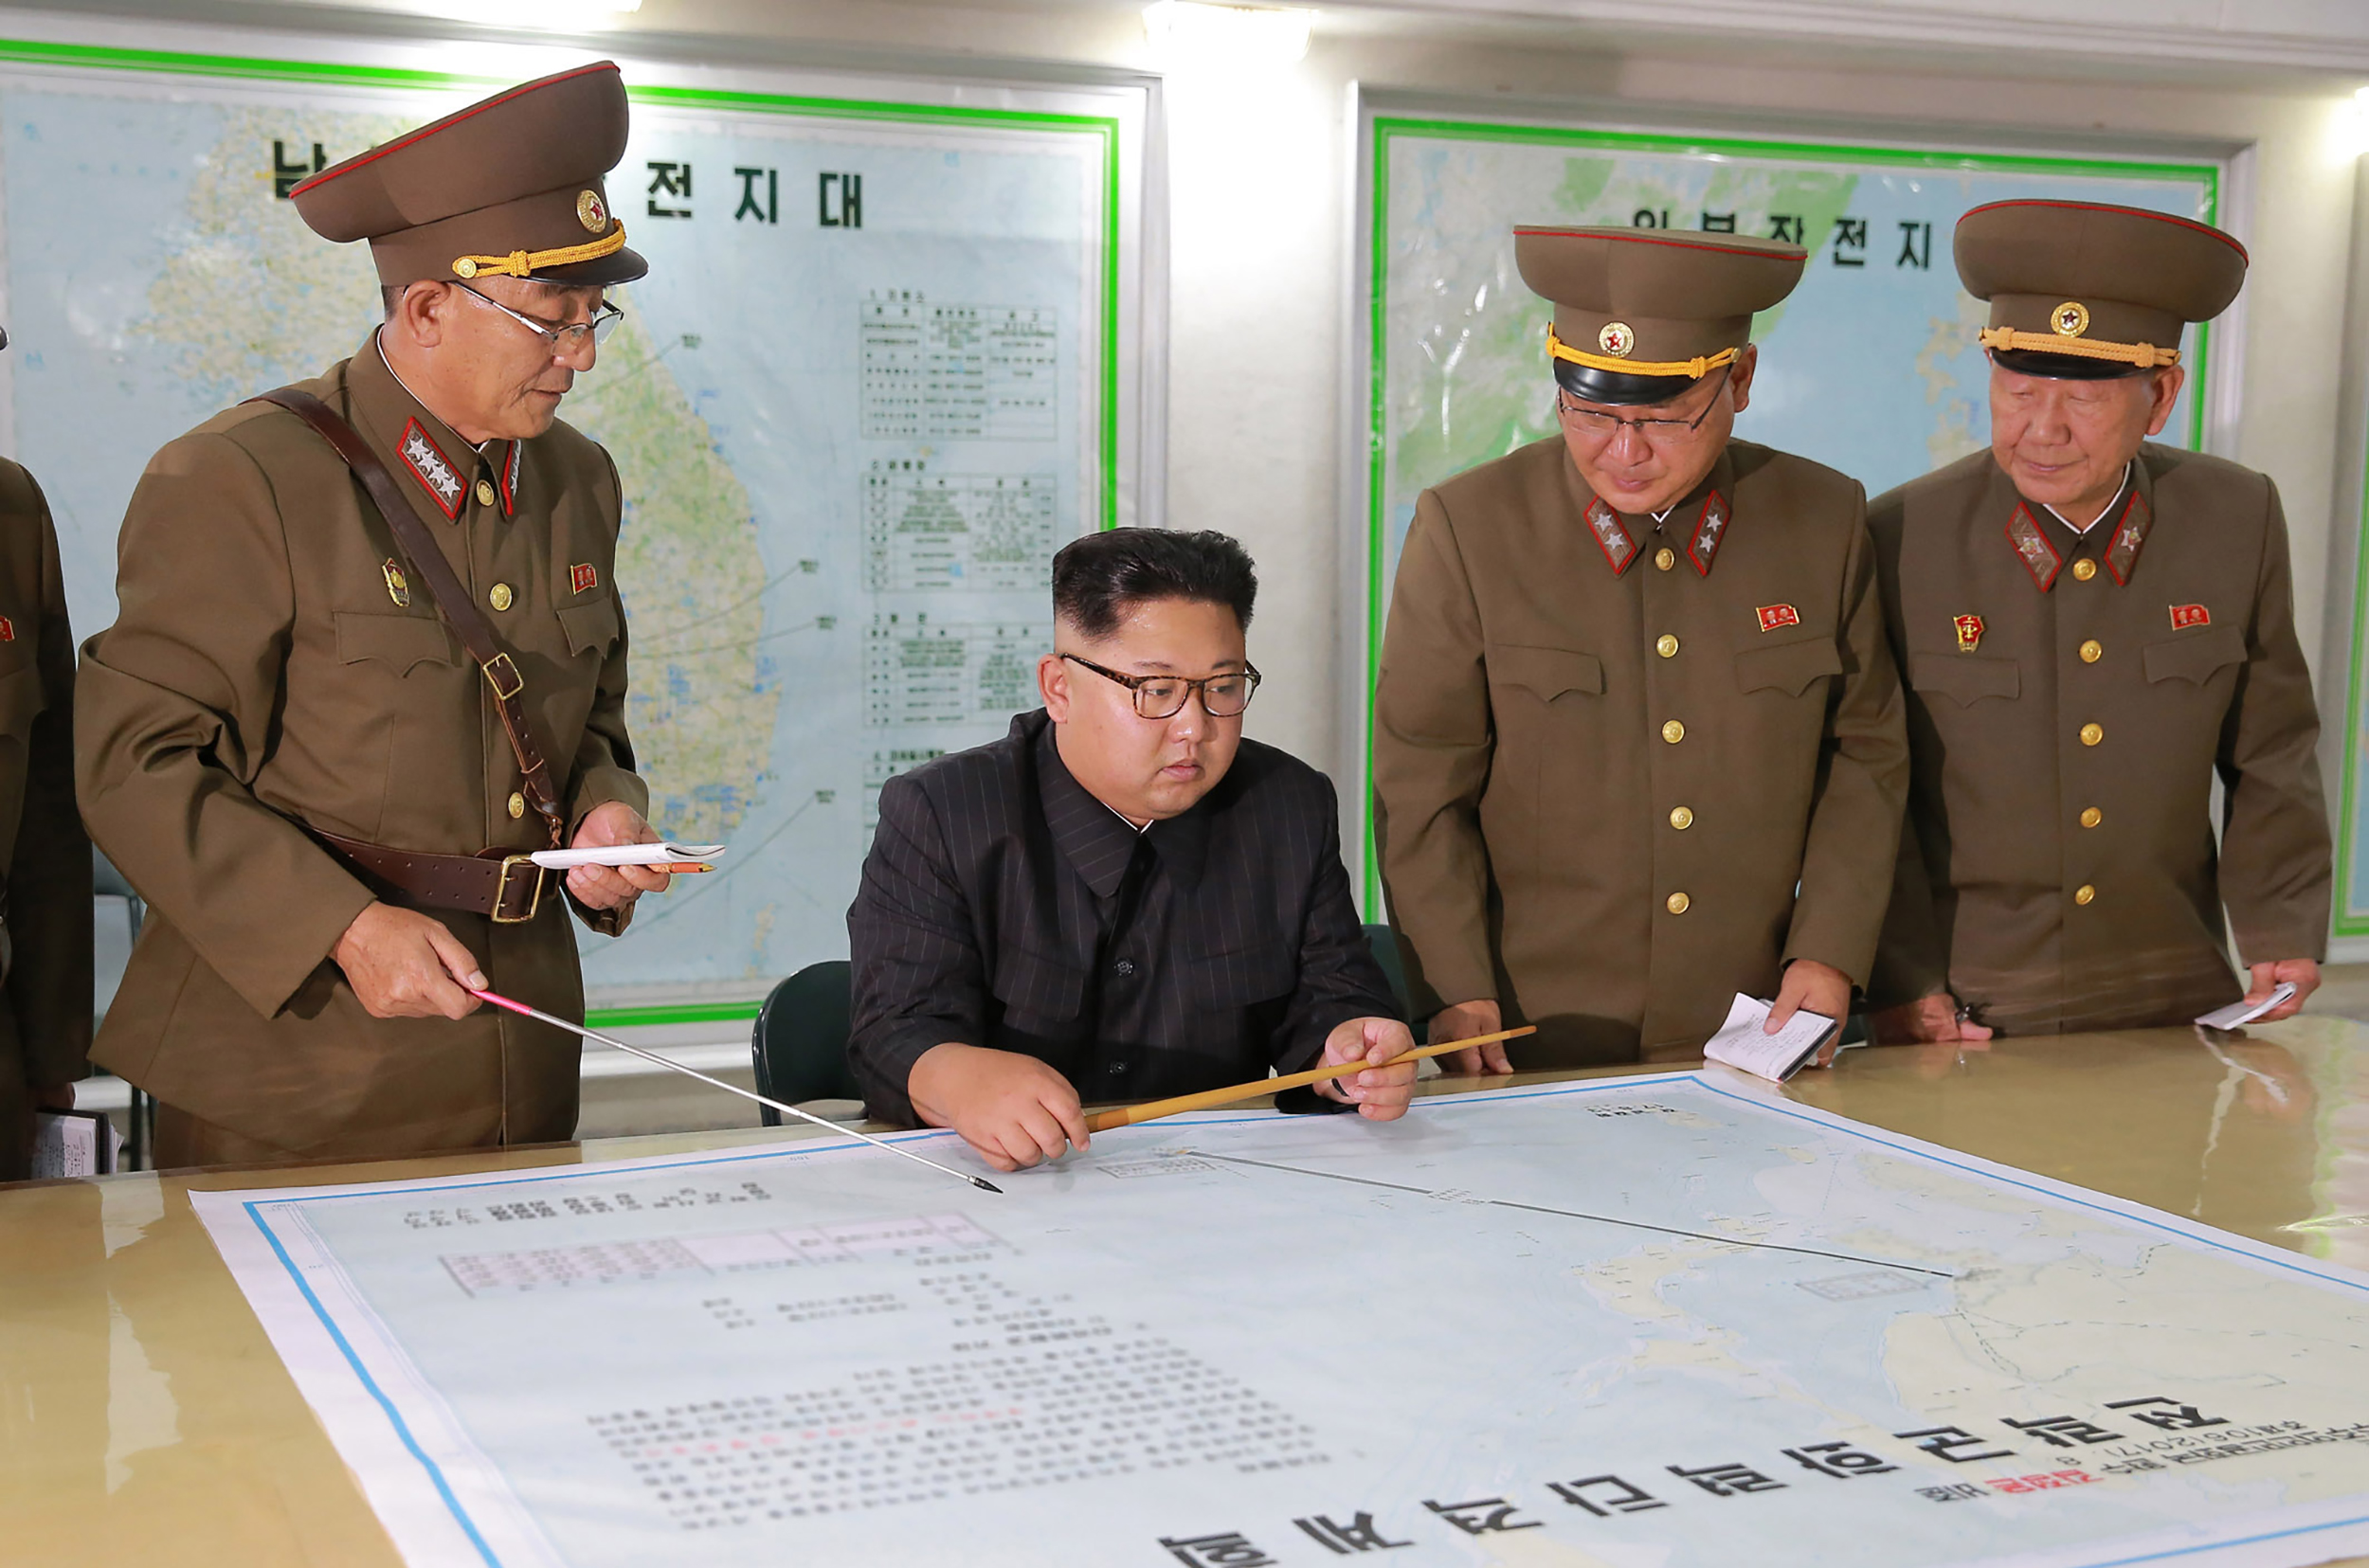 TOPSHOT - This picture taken on August 14, 2017 and released from North Korea's official Korean Central News Agency (KCNA) on August 15, 2017 shows North Korean leader Kim Jong-Un (C) inspecting the Command of the Strategic Force of the Korean People's Army (KPA) at an undisclosed location. North Korean leader Kim Jong-Un said on August 15 he would hold off on a planned missile strike near Guam, but warned the highly provocative move would go ahead in the event of further "reckless actions" by Washington. (STR/AFP via Getty Images)